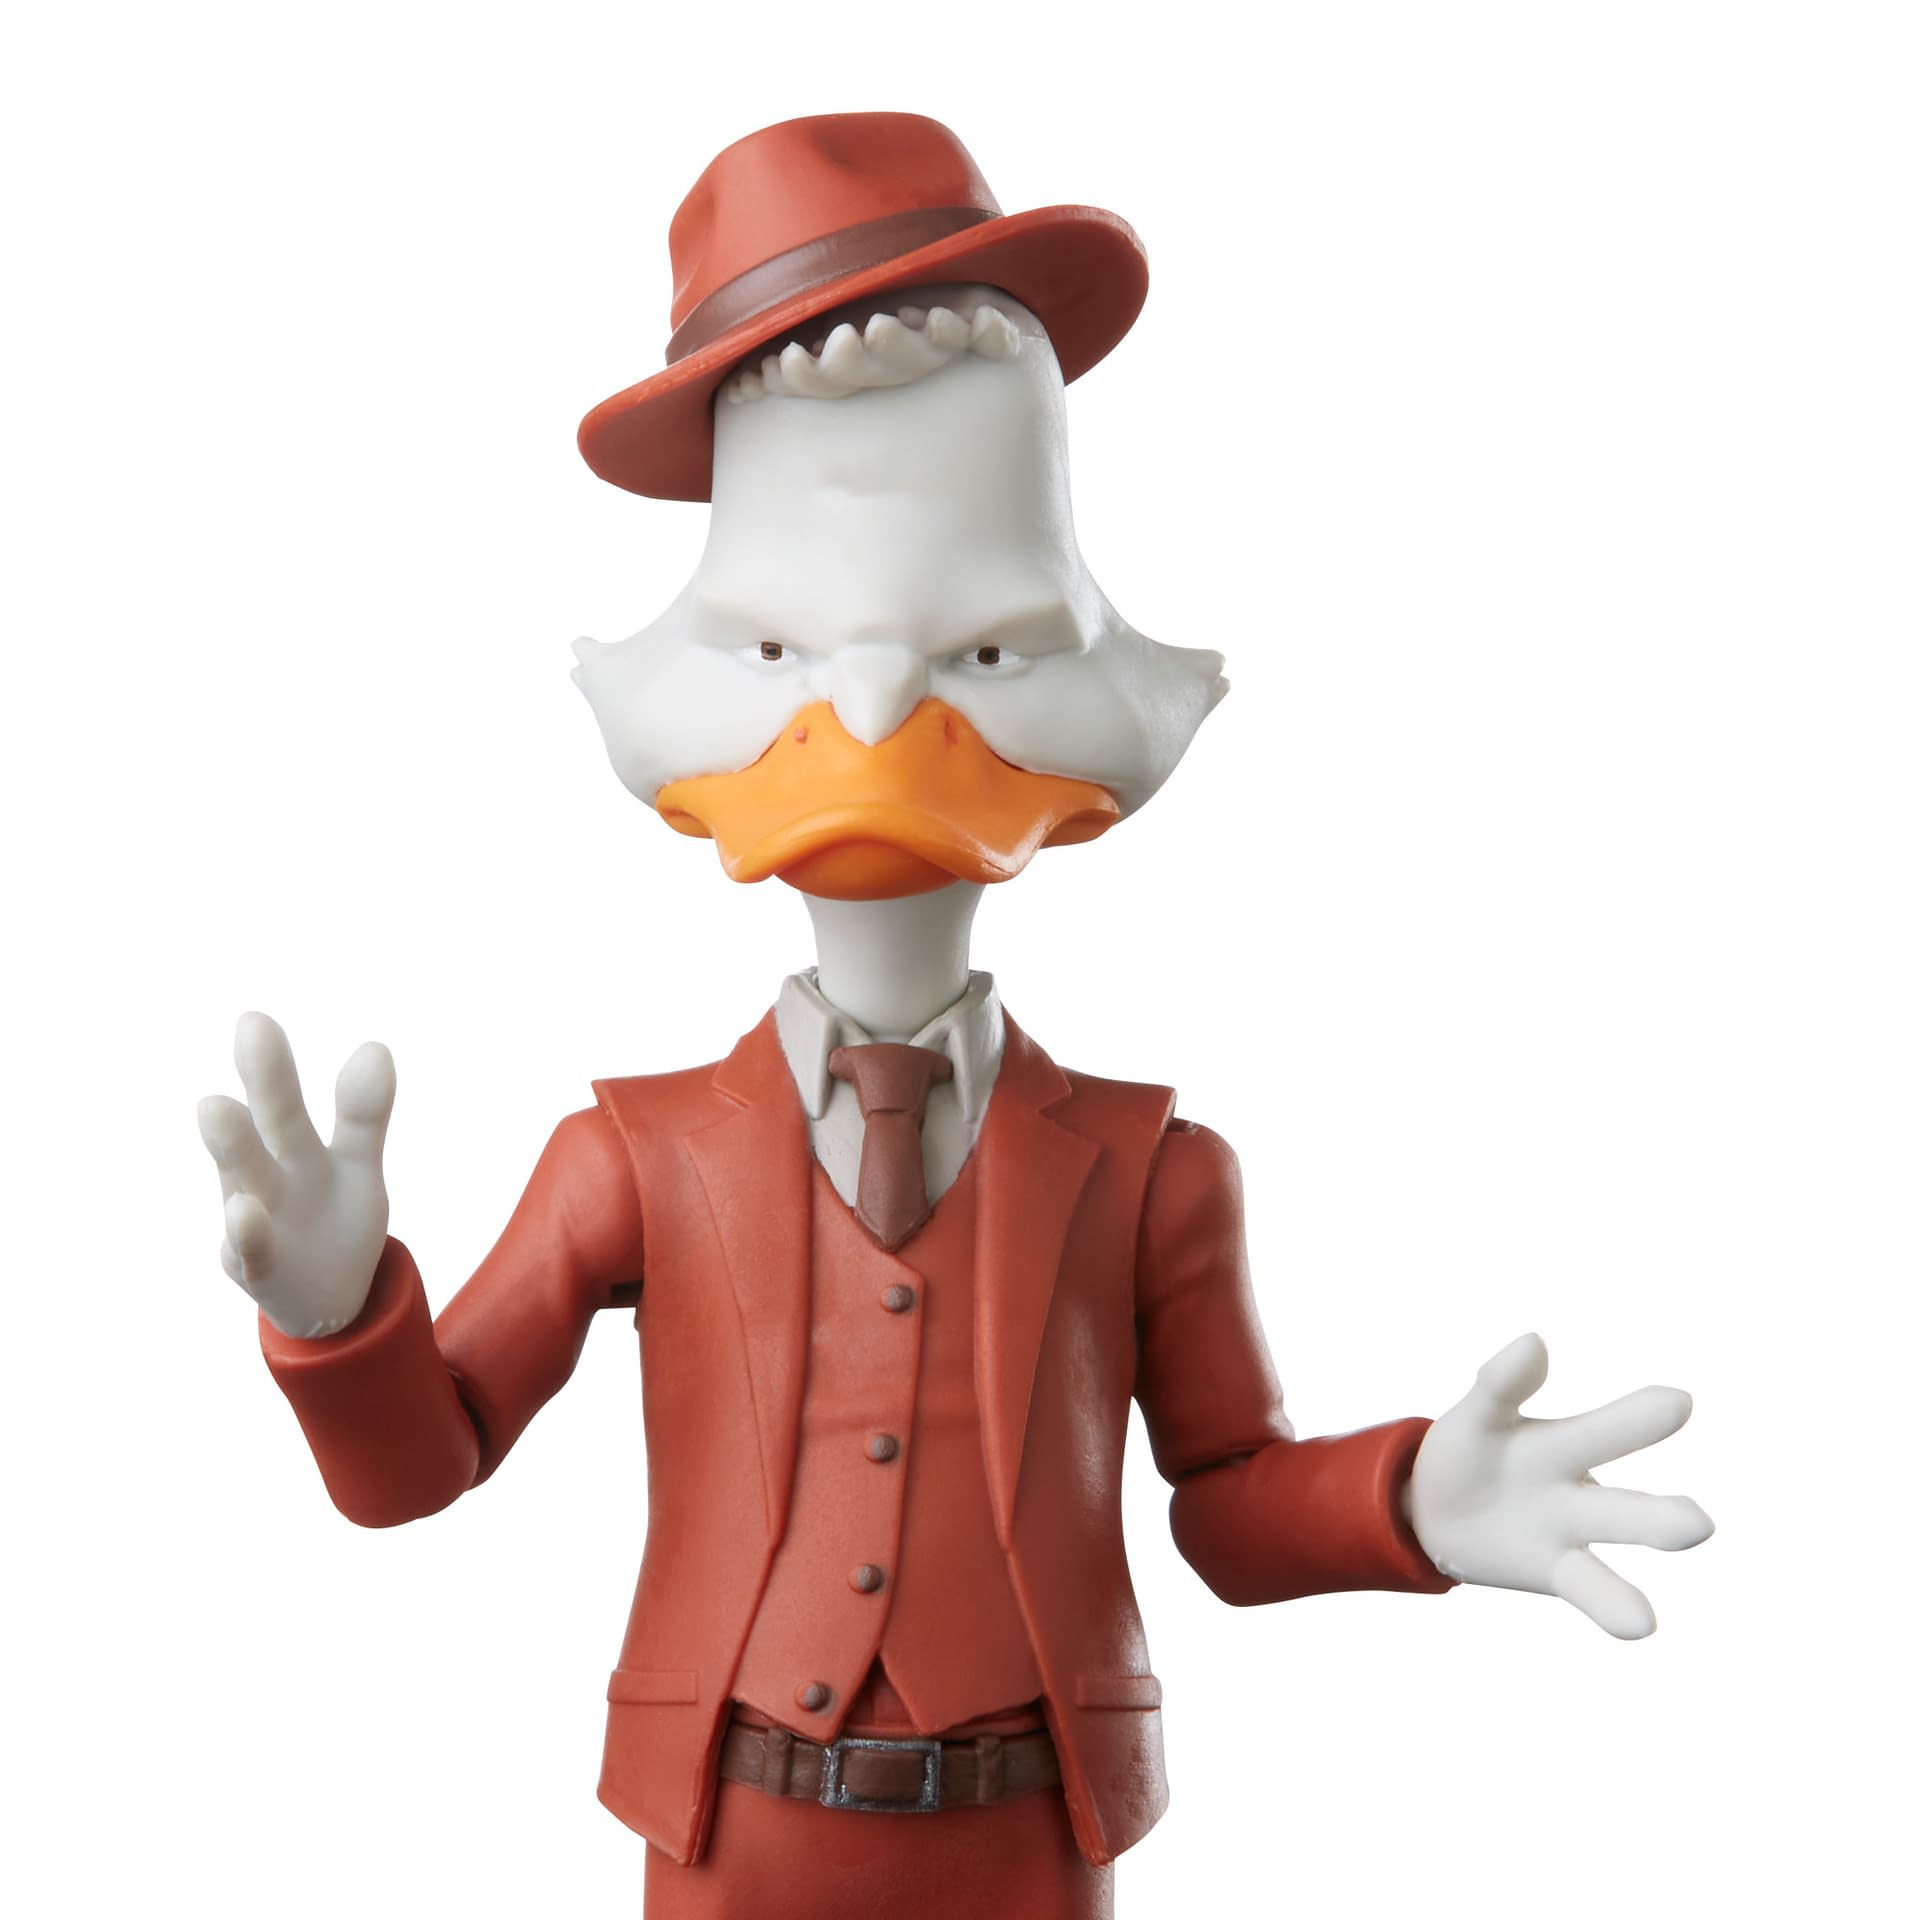 Howard the Duck Comes to Hasbro with New Marvel Legends Release